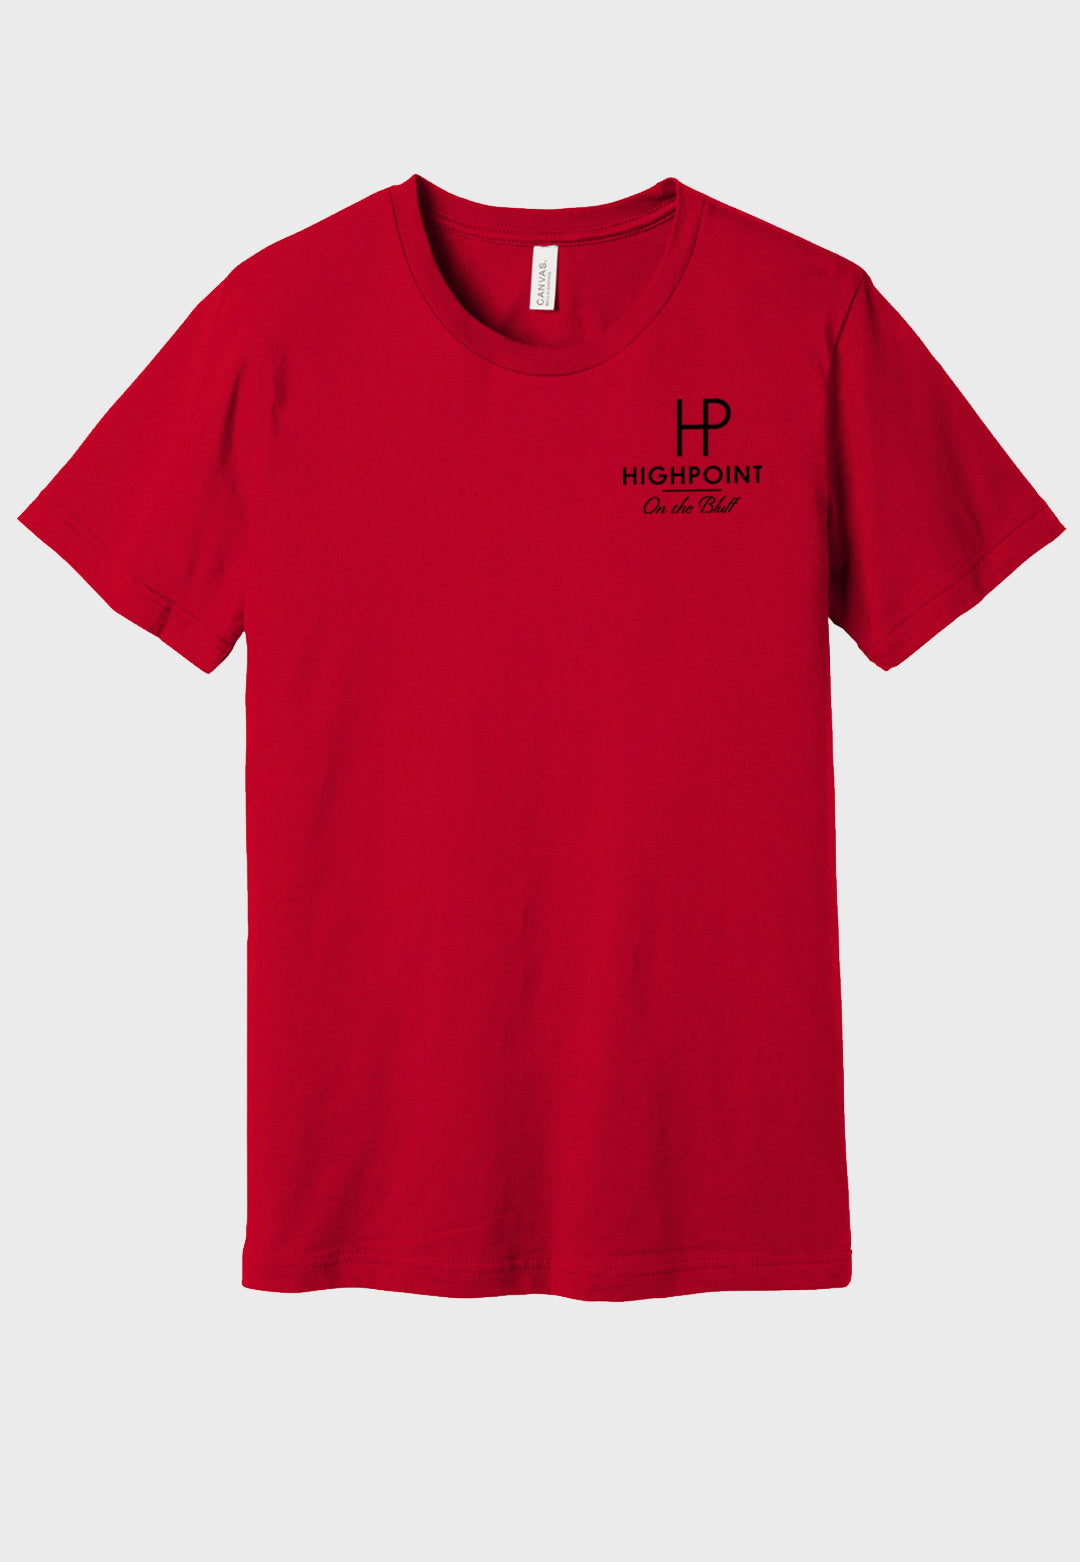 High Point Farm BELLA+CANVAS ® Unisex Jersey Short Sleeve Tee - Adult/Youth Sizes